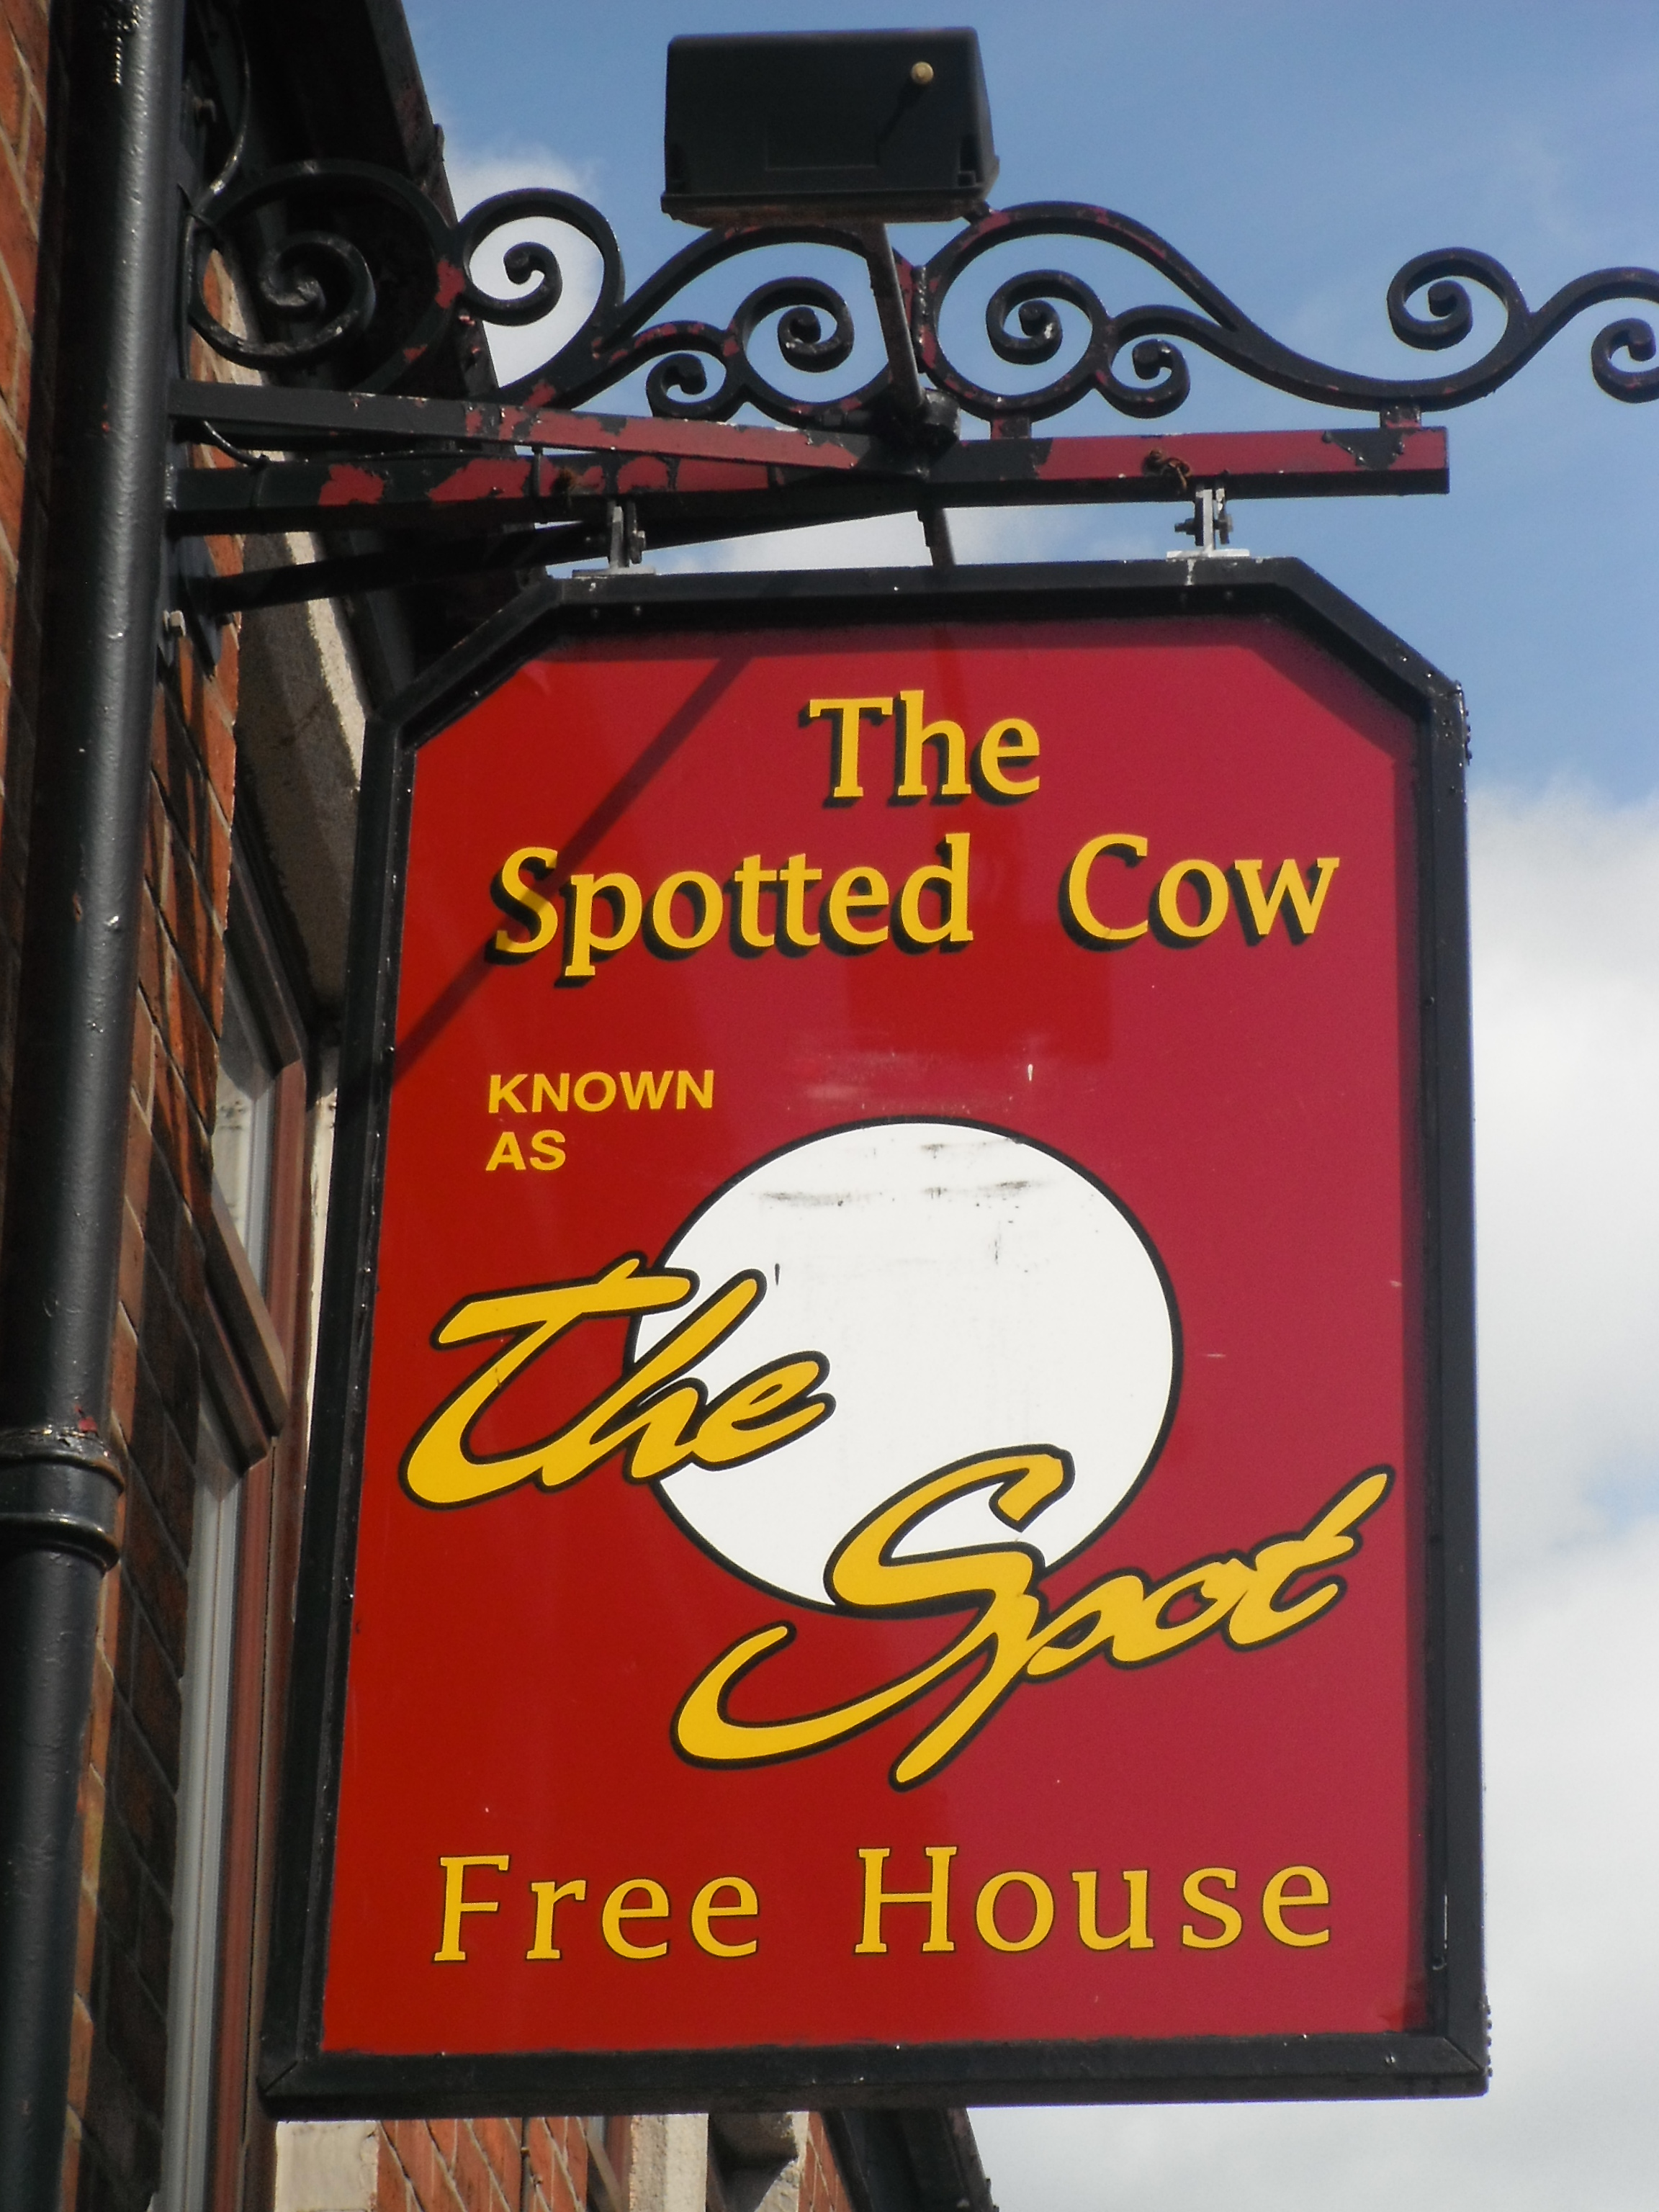 Photo taken by me – The Spotted Cow pub sign, Bury, Manchester 